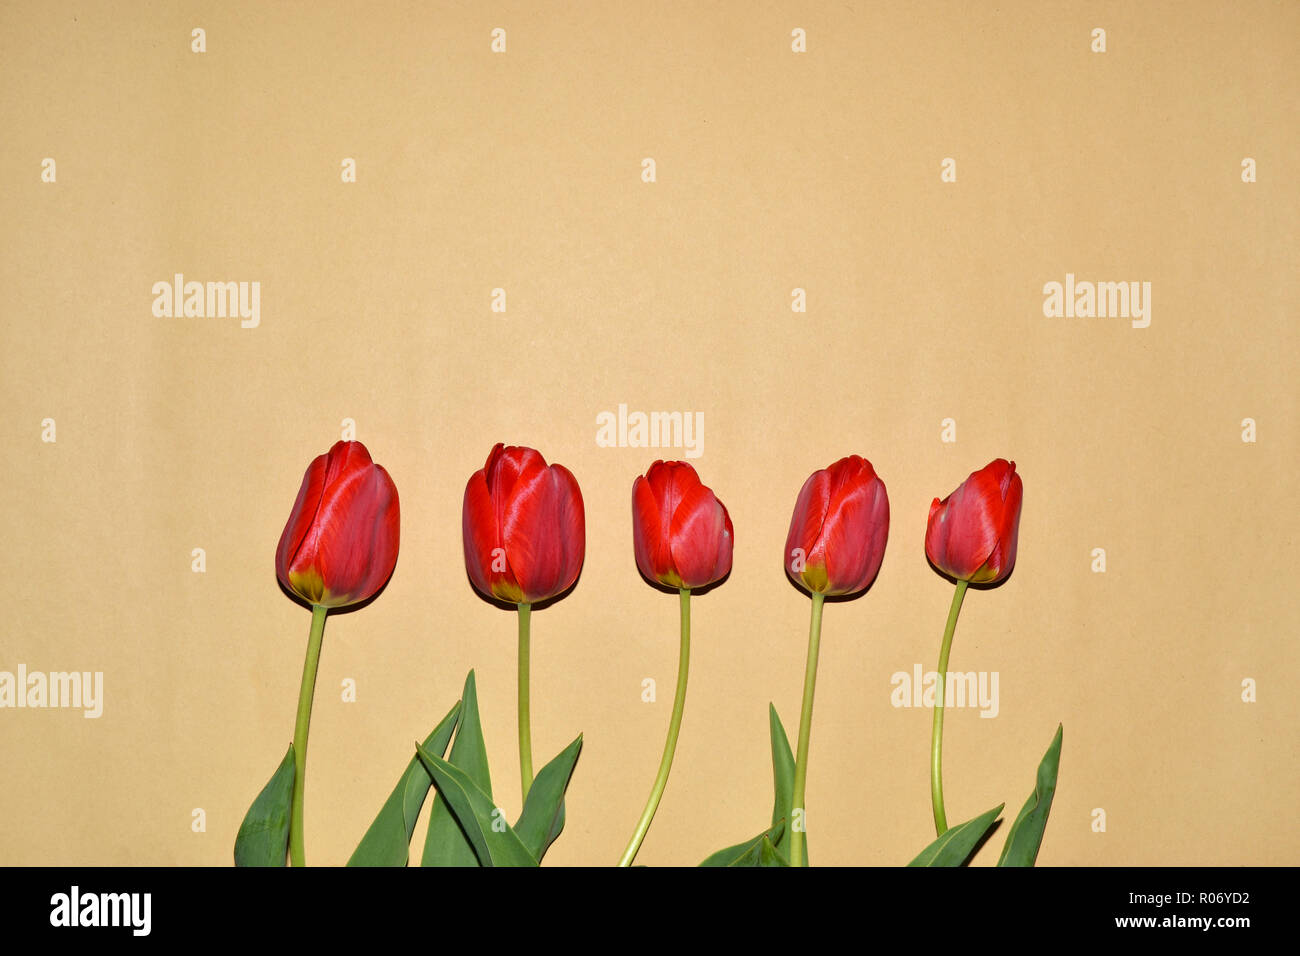 Flowers tulips on brown surface. A place for notes or embed images. Stock Photo